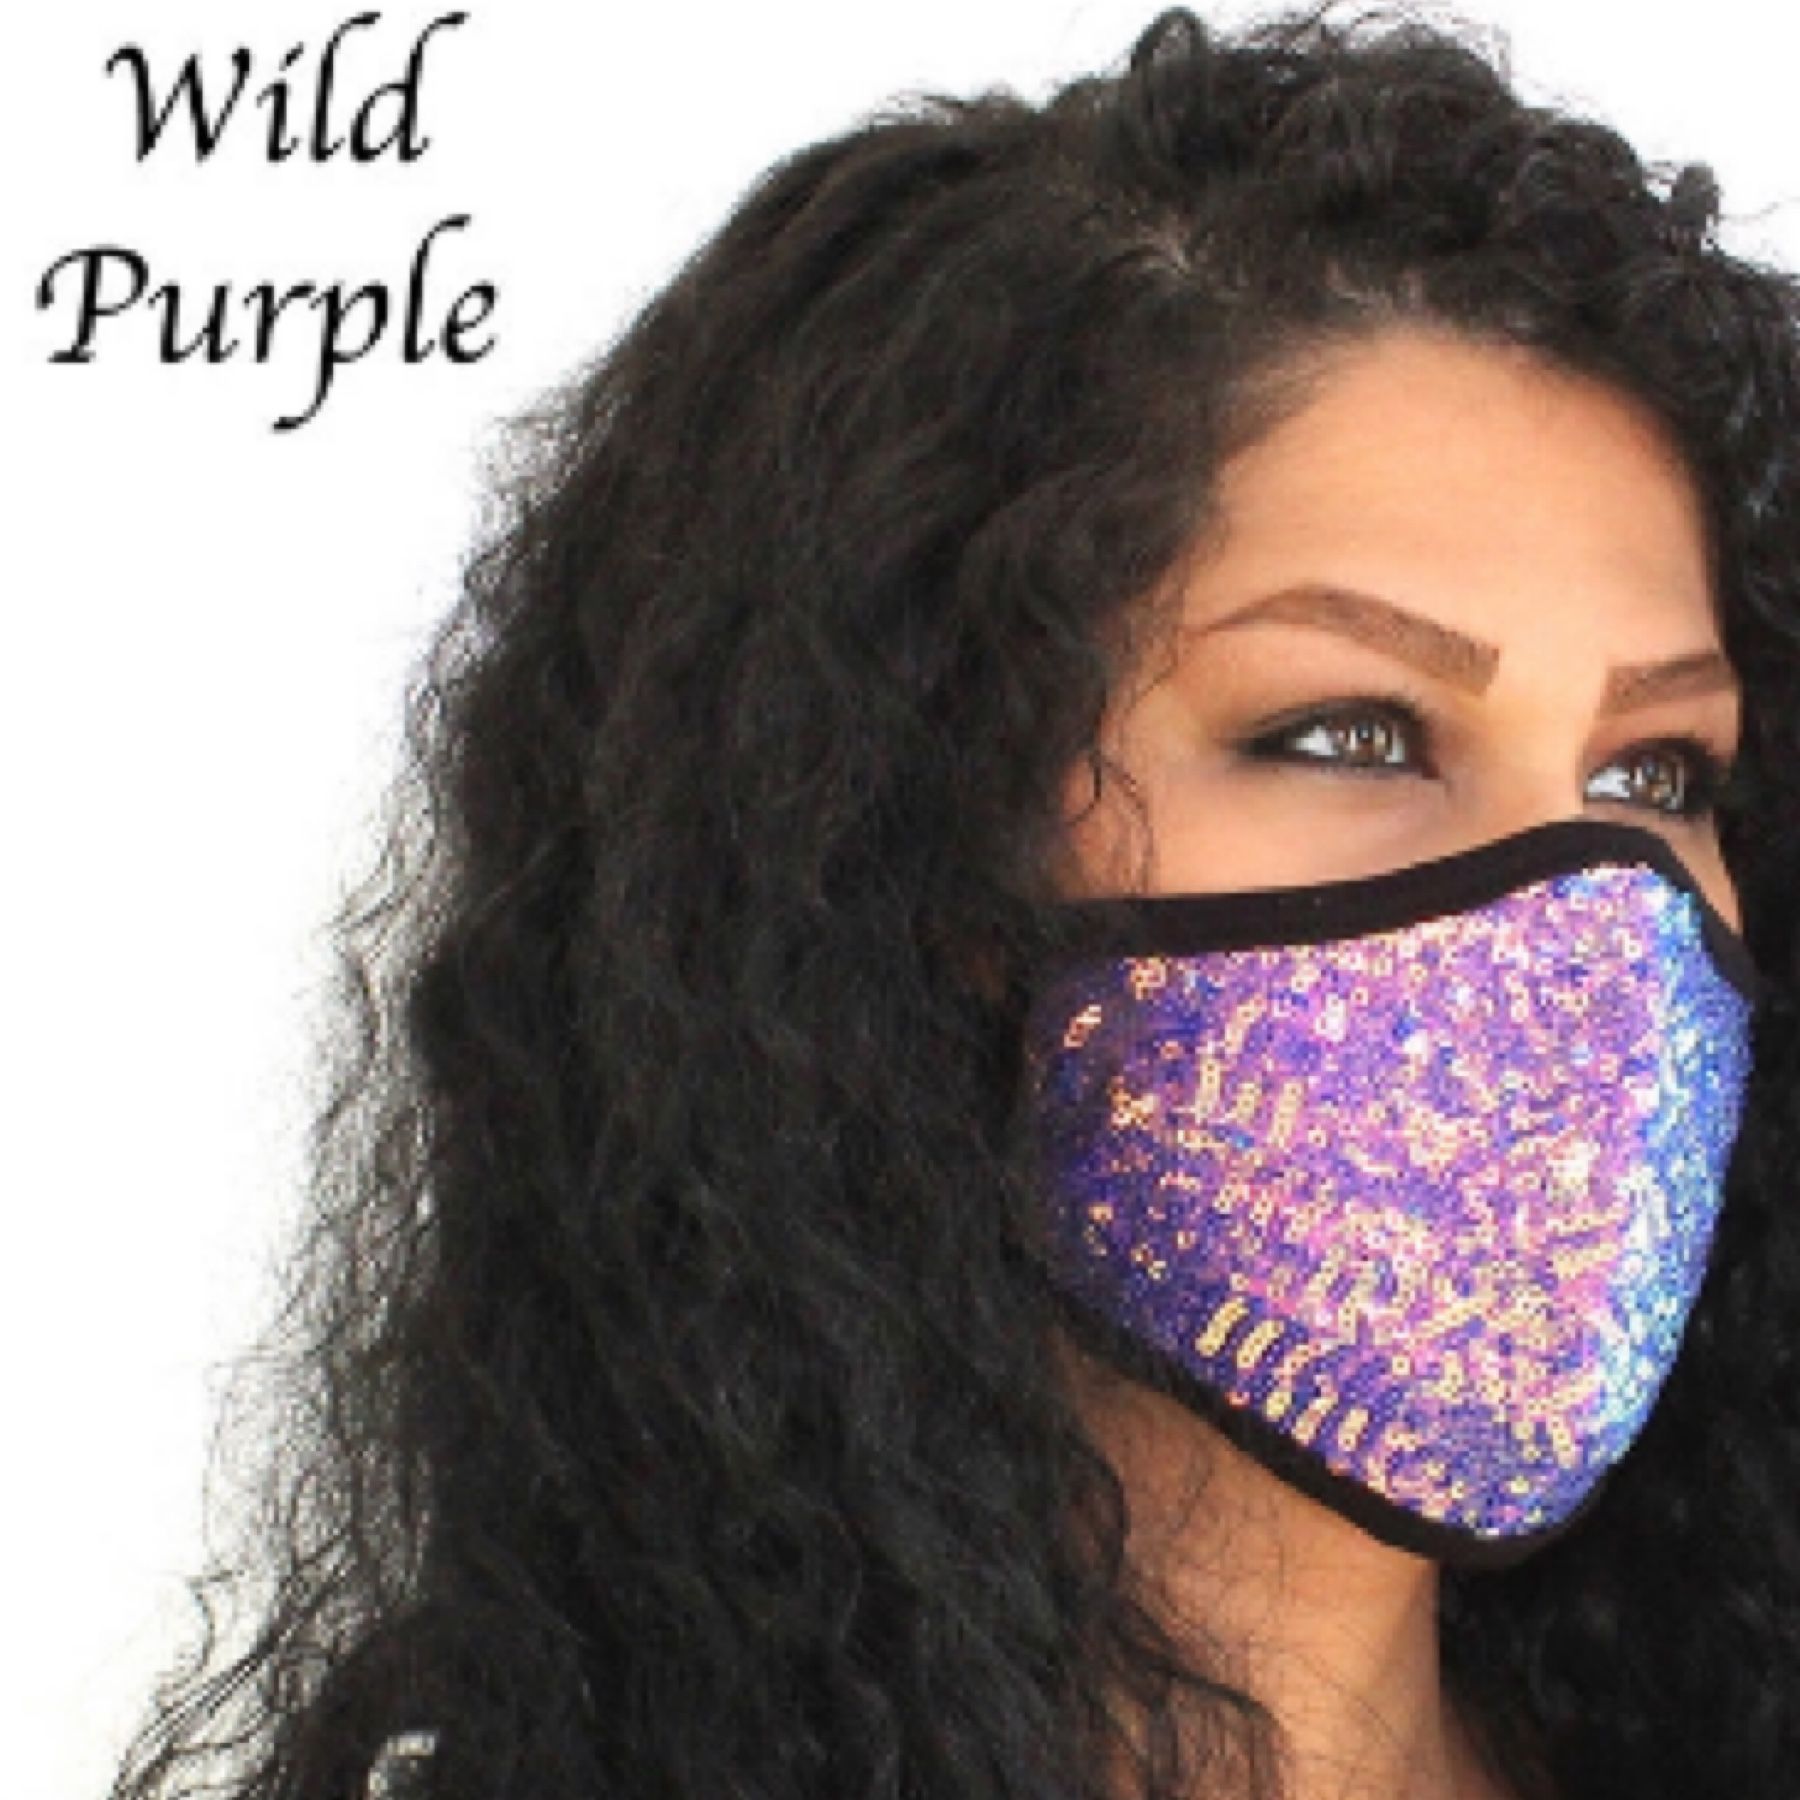 Wild purple washable face mask made in USA 🇺🇸